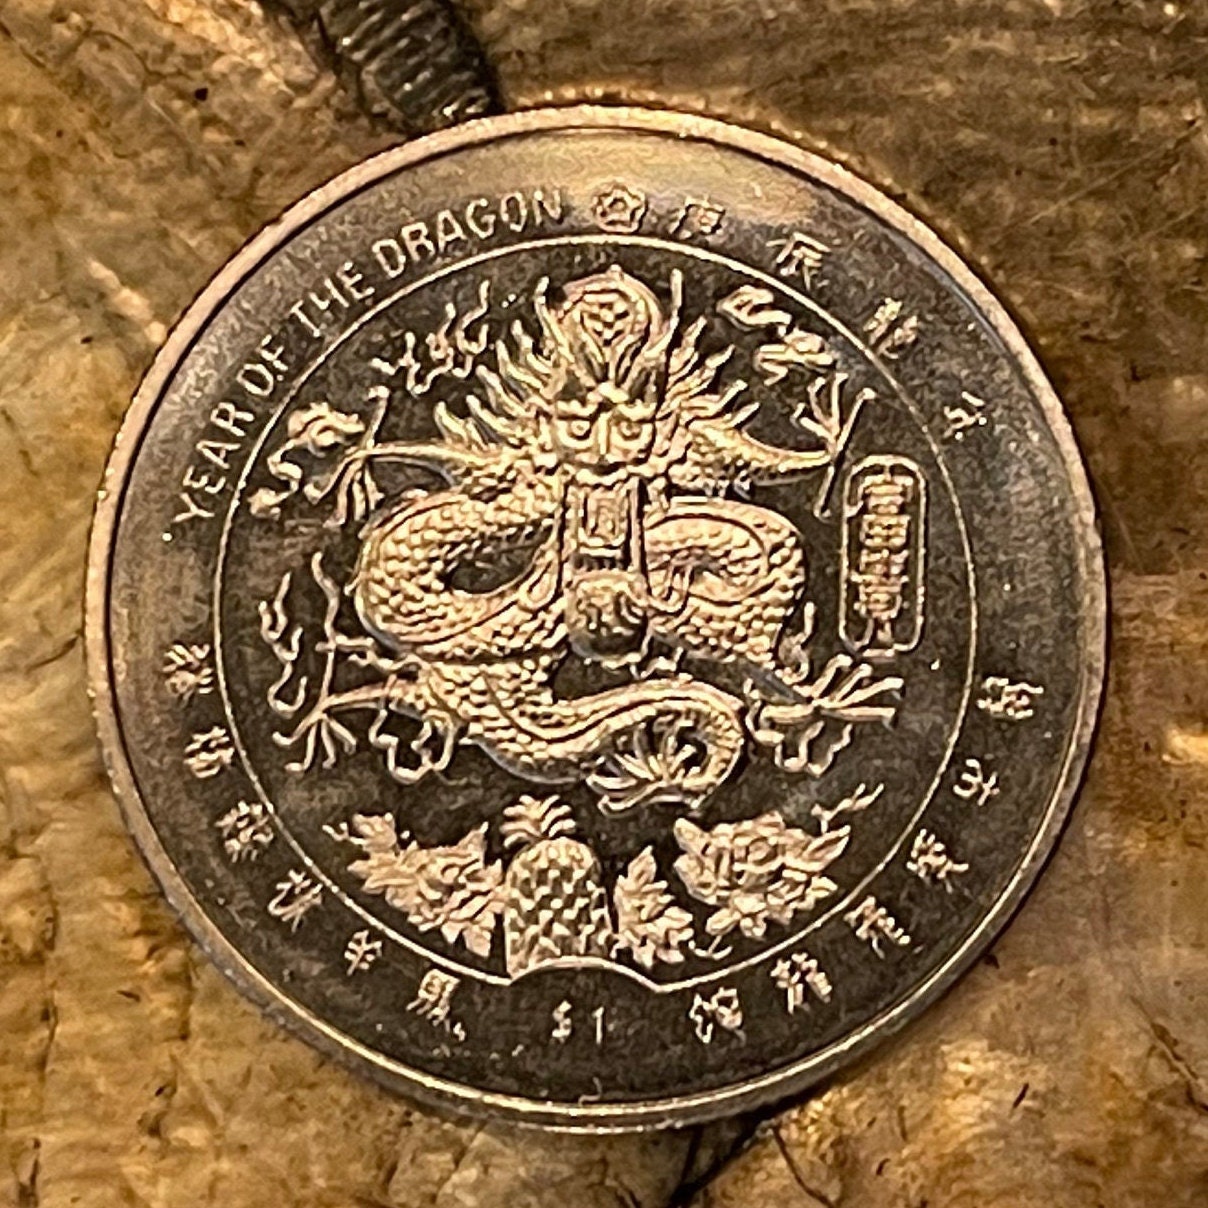 Year of the Dragon 1 Dollar Liberia Authentic Coin Money for Jewelry (Palm Tree at Beach) (Freedom Ship) (Millenium) (2000) (Millennials)